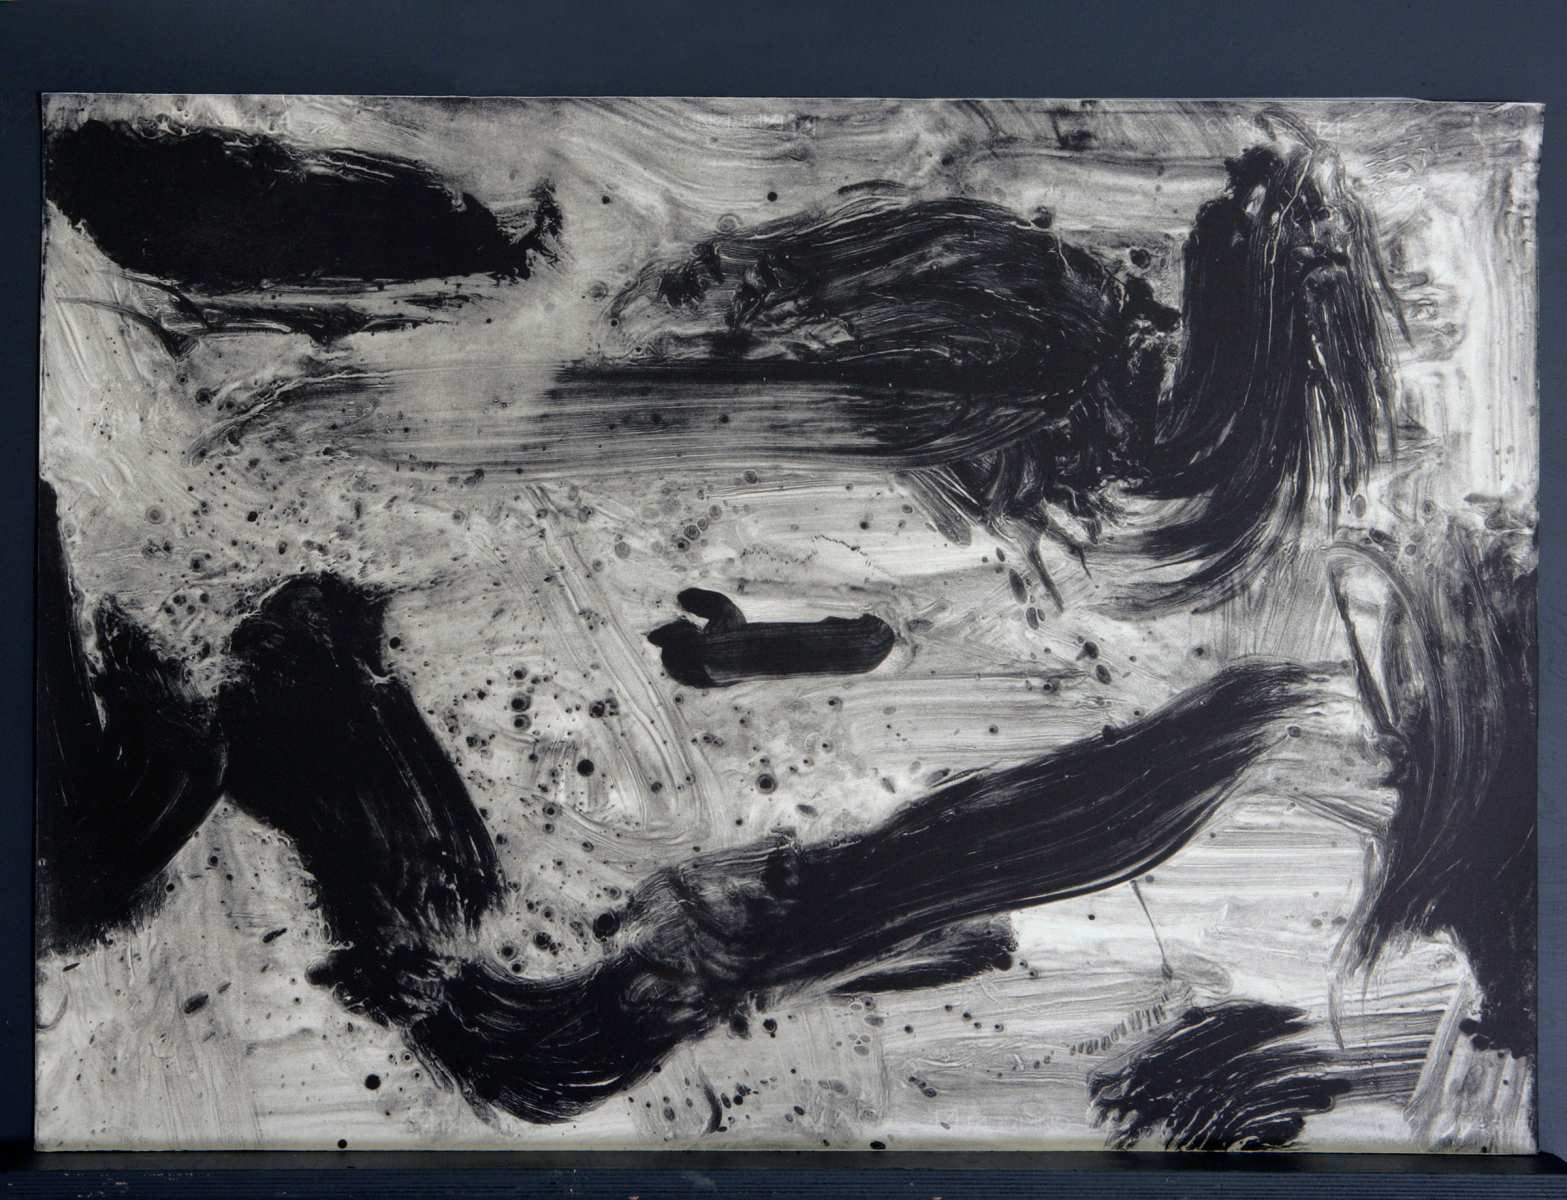 Untitled-93108, 1993, Lithography, 70x100cm